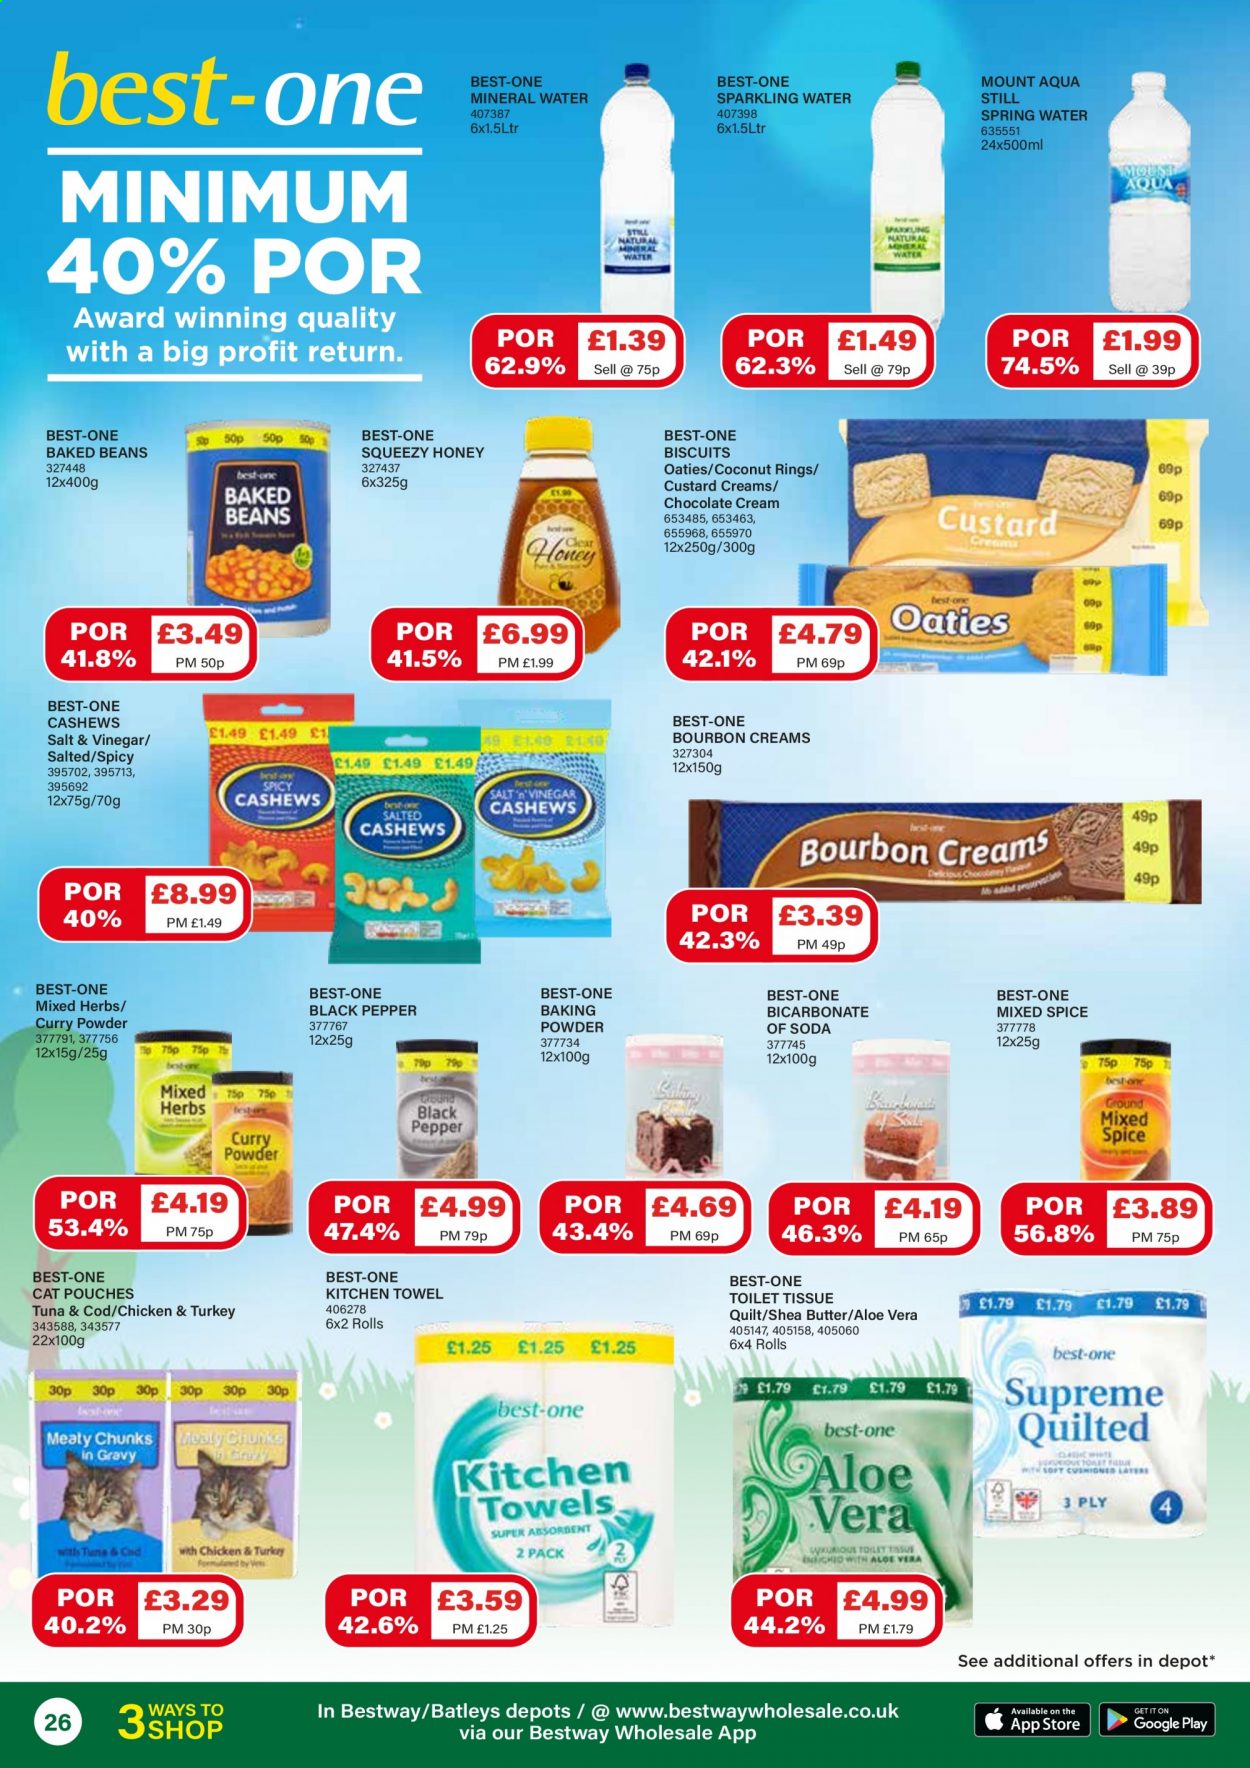 thumbnail - Bestway offer  - 26/03/2021 - 22/04/2021 - Sales products - beans, coconut, cod, tuna, custard, biscuit, baked beans, black pepper, herbs, curry powder, vinegar, honey, cashews, soda, mineral water, spring water, sparkling water, bourbon whiskey, toilet paper, tissues, kitchen towels, shea butter, quilt. Page 26.